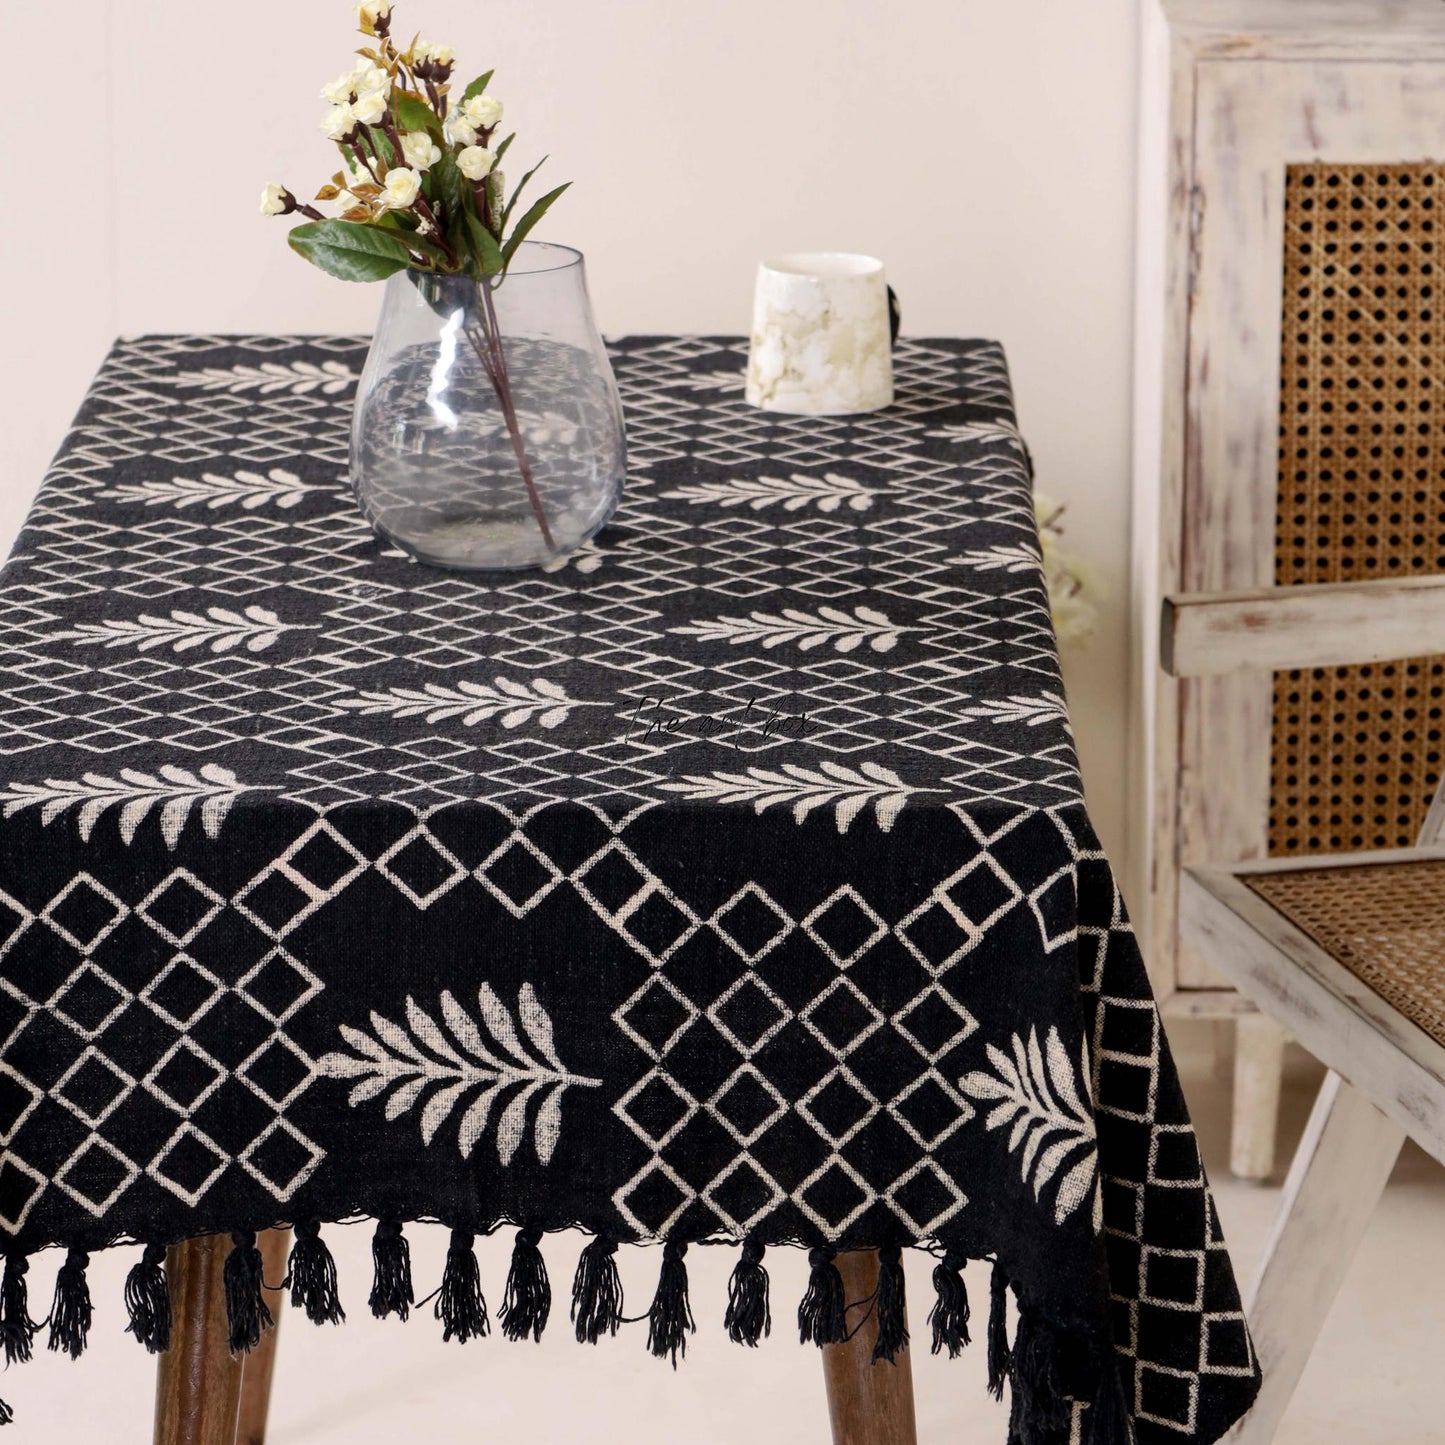 Black Table Covers with White Floral